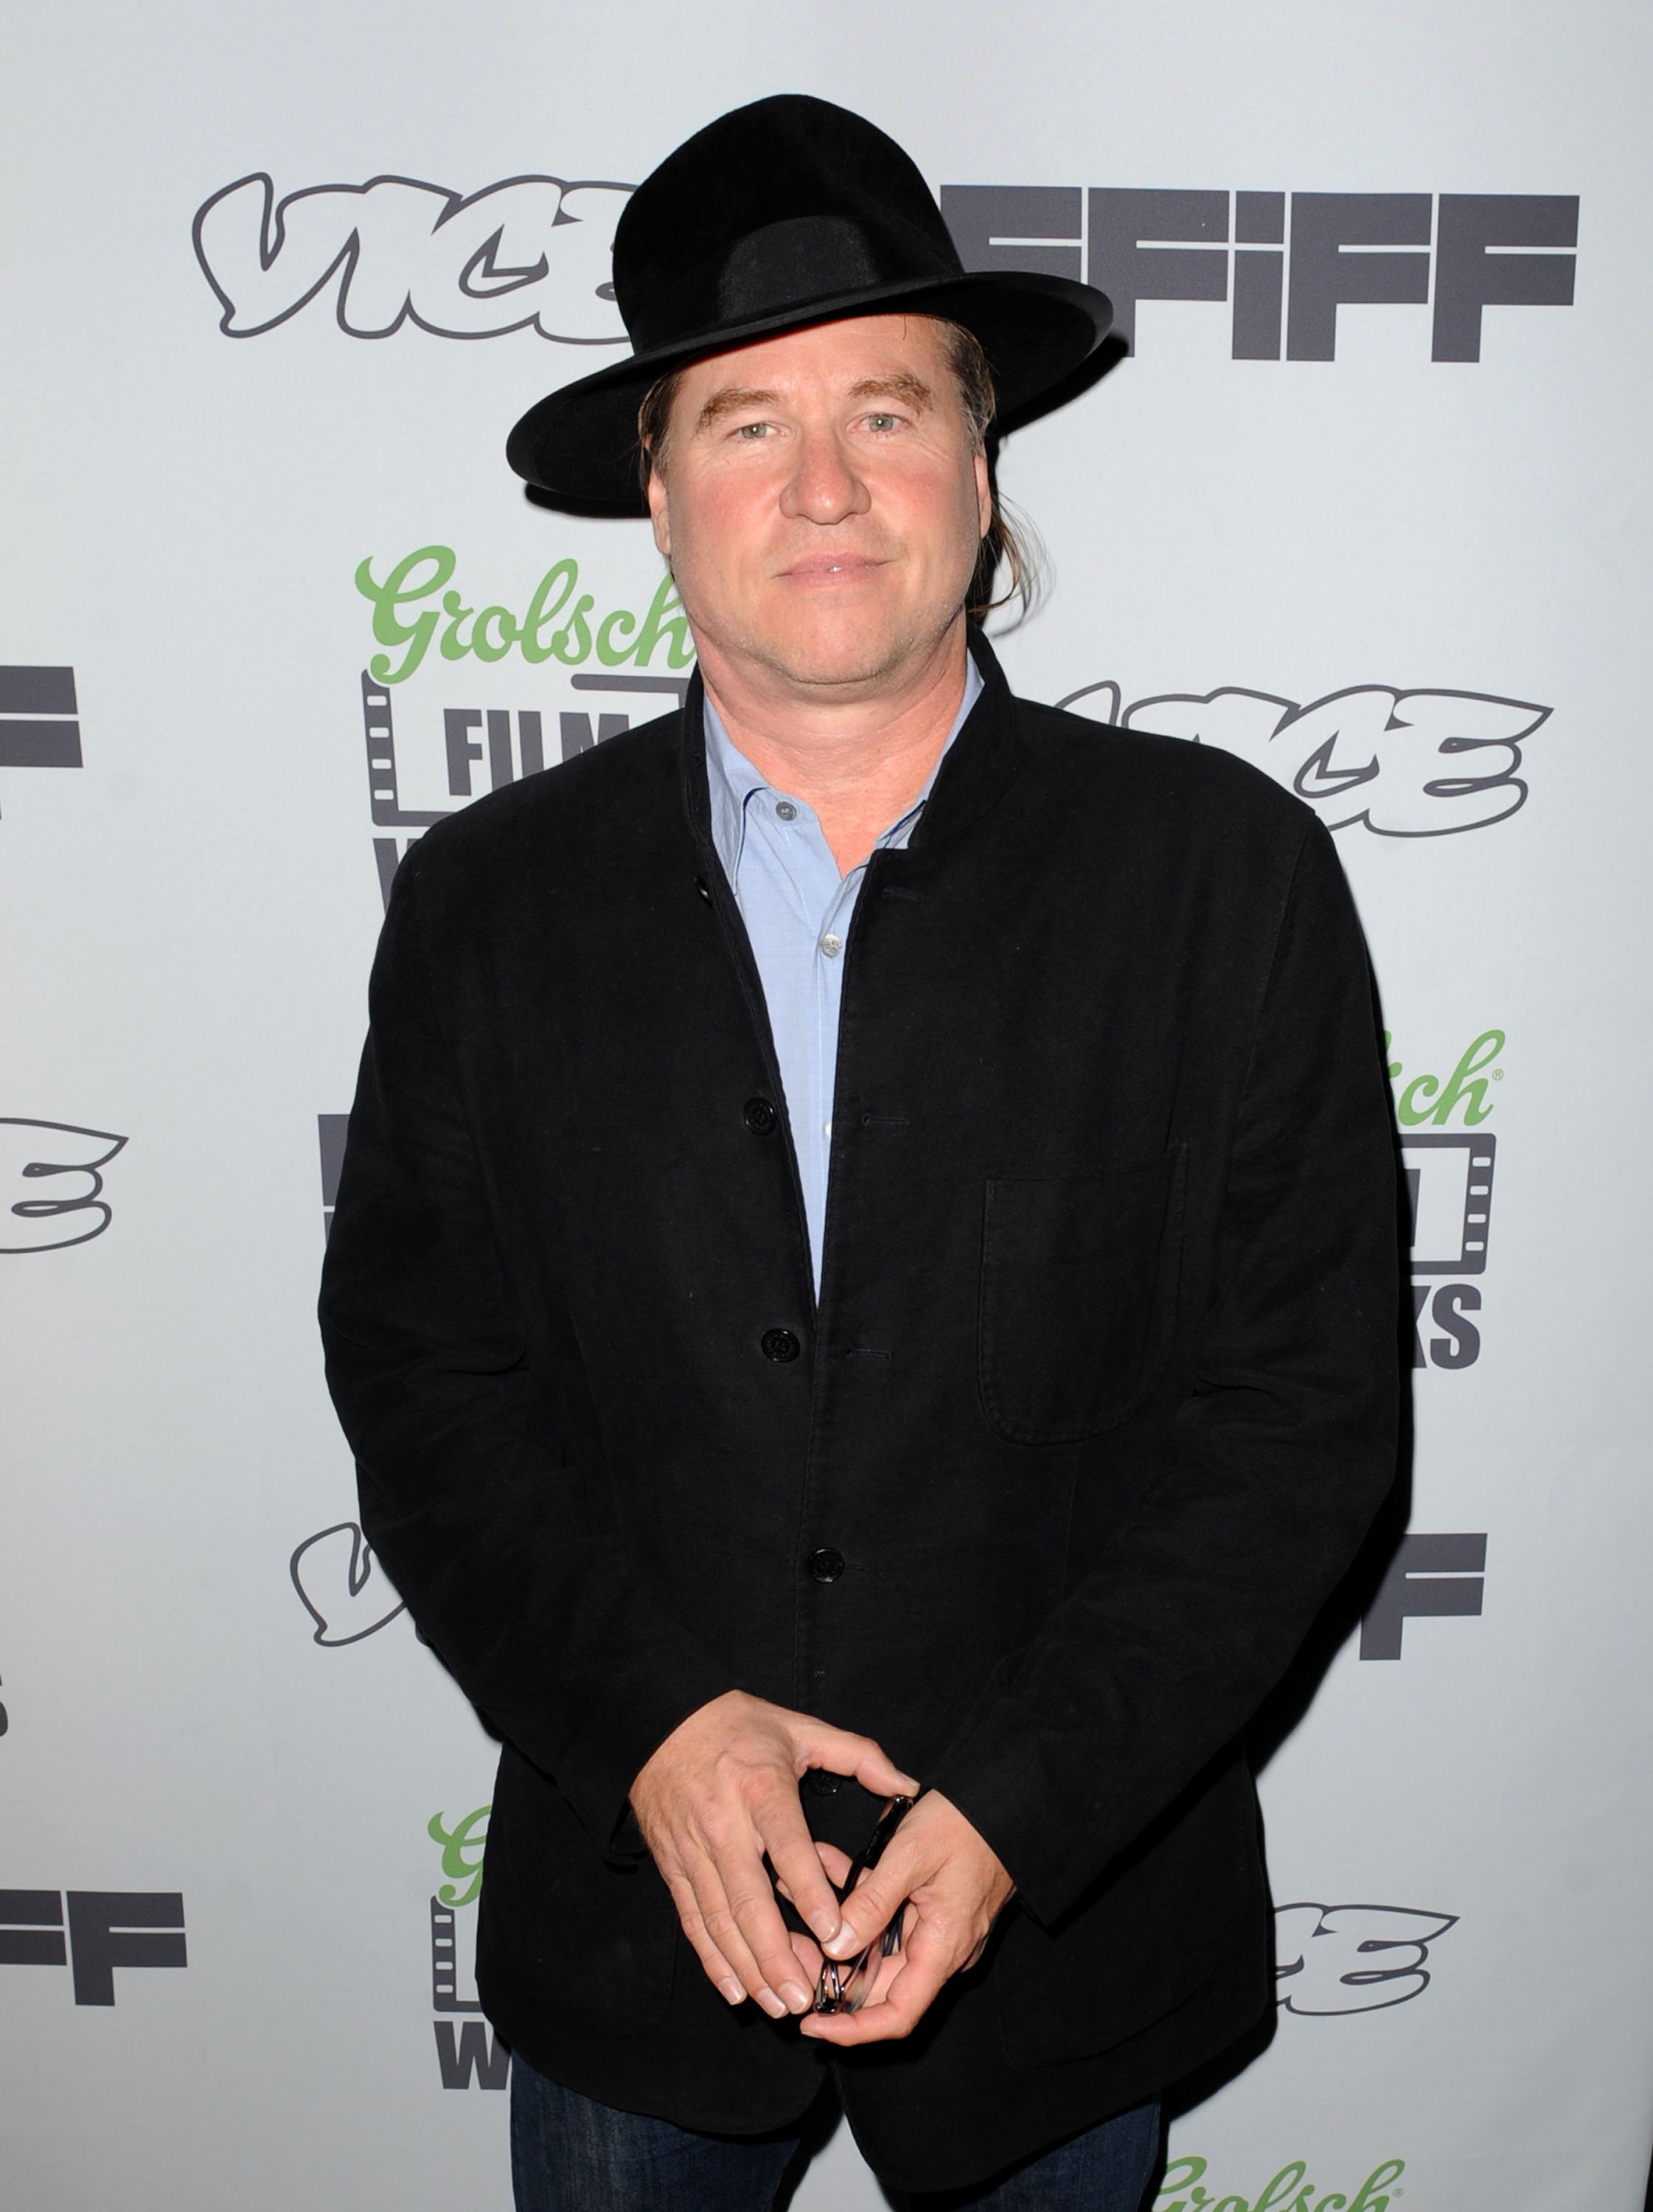 Val Kilmer attends the "The Fourth Dimension" World Premiere during the 2012 San Francisco Film Festival at Sundance Kabuki Cinema on April 20, 2012 in San Francisco, California | Source: Getty Images